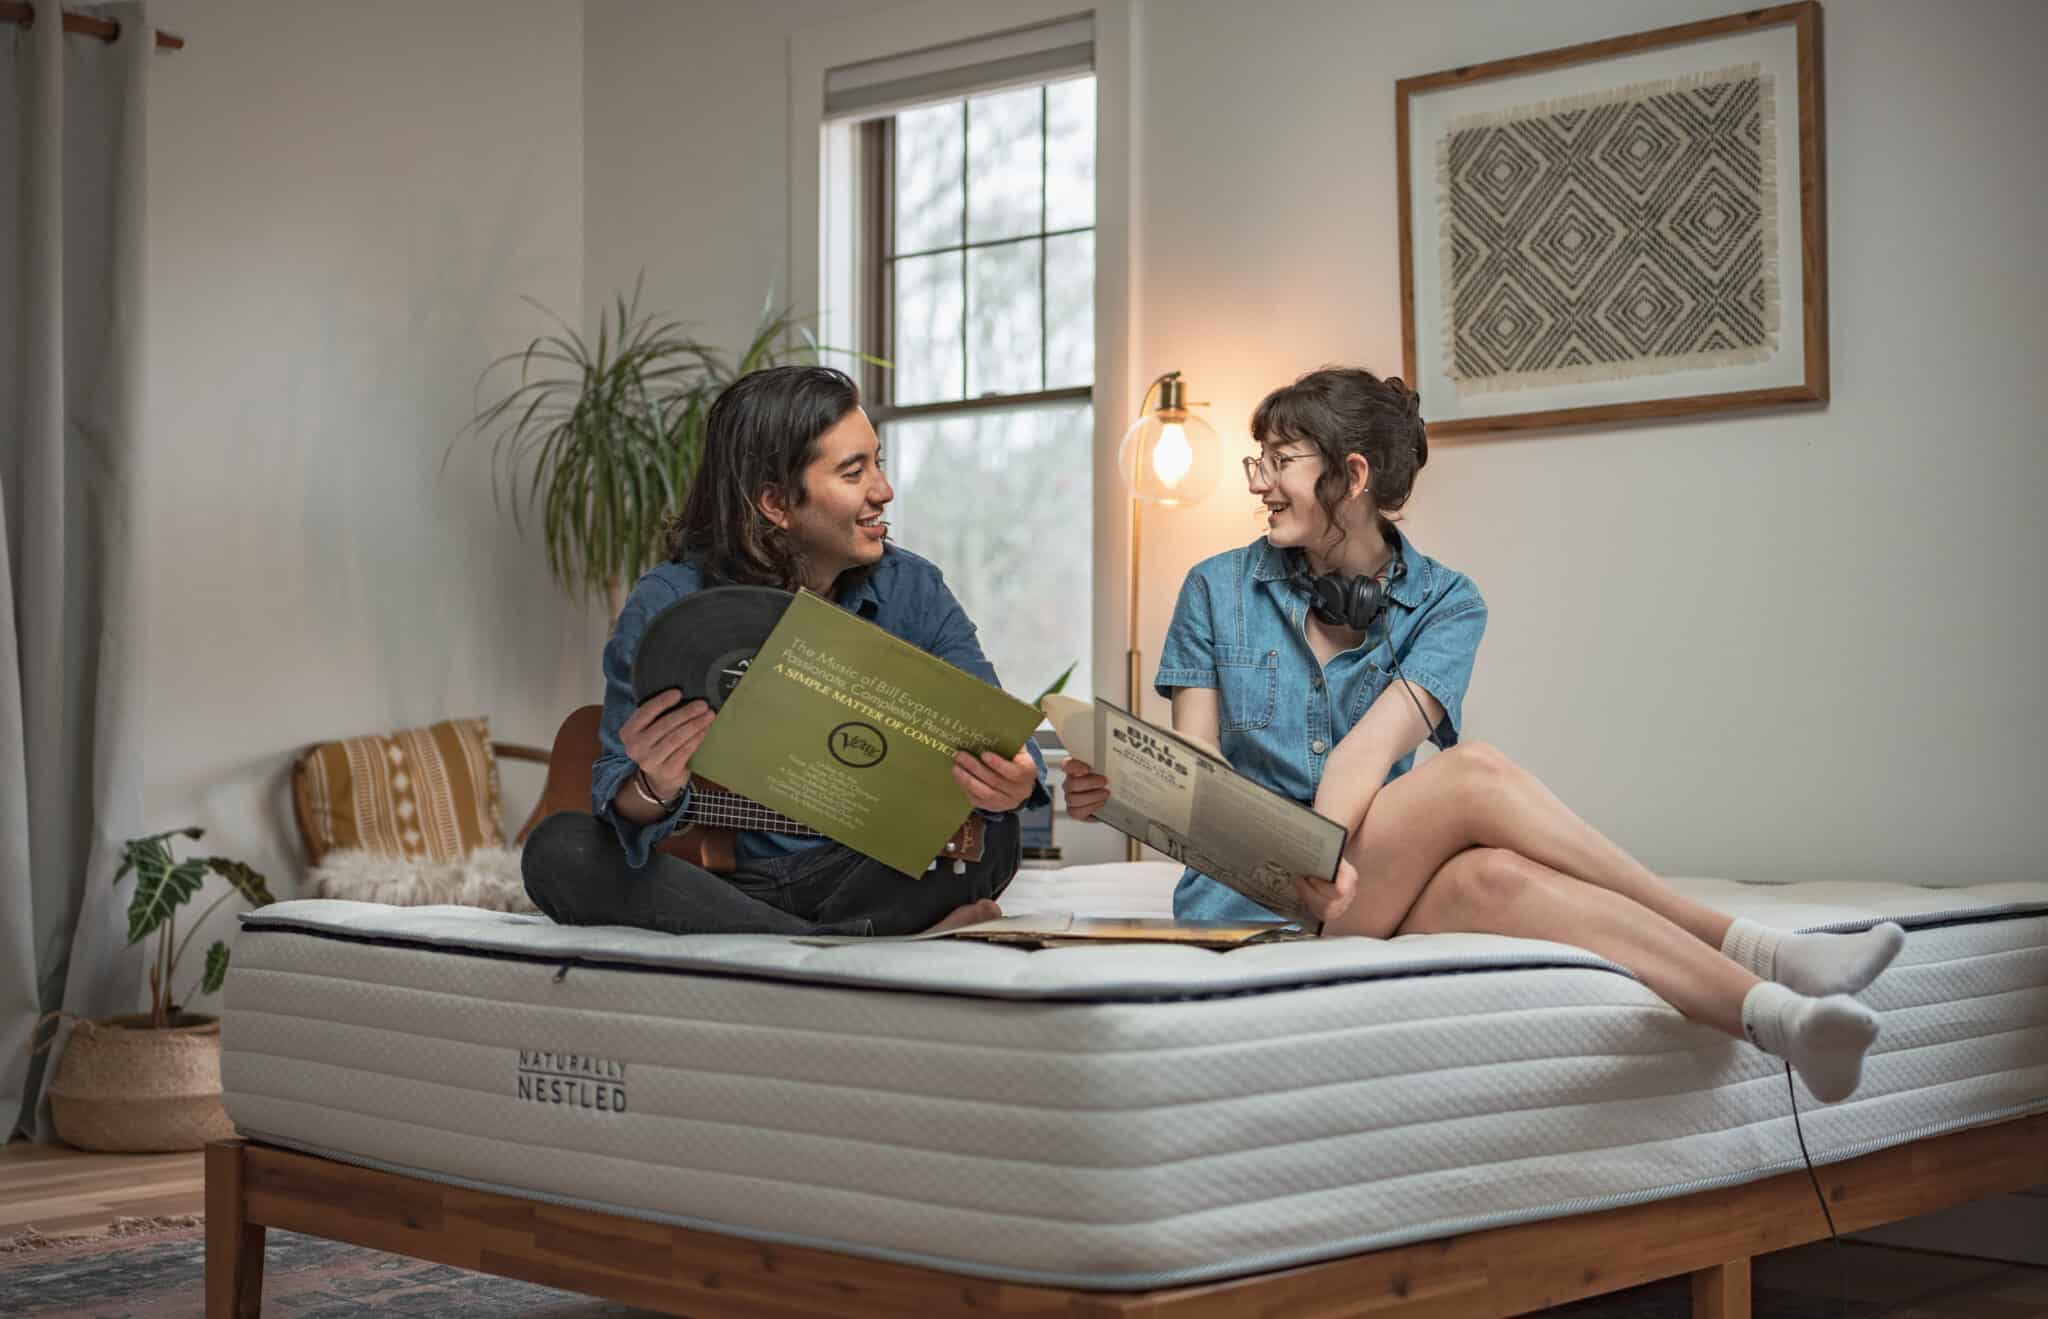 A couple chats while relaxing on an ethical mattress from Naturally Nestled